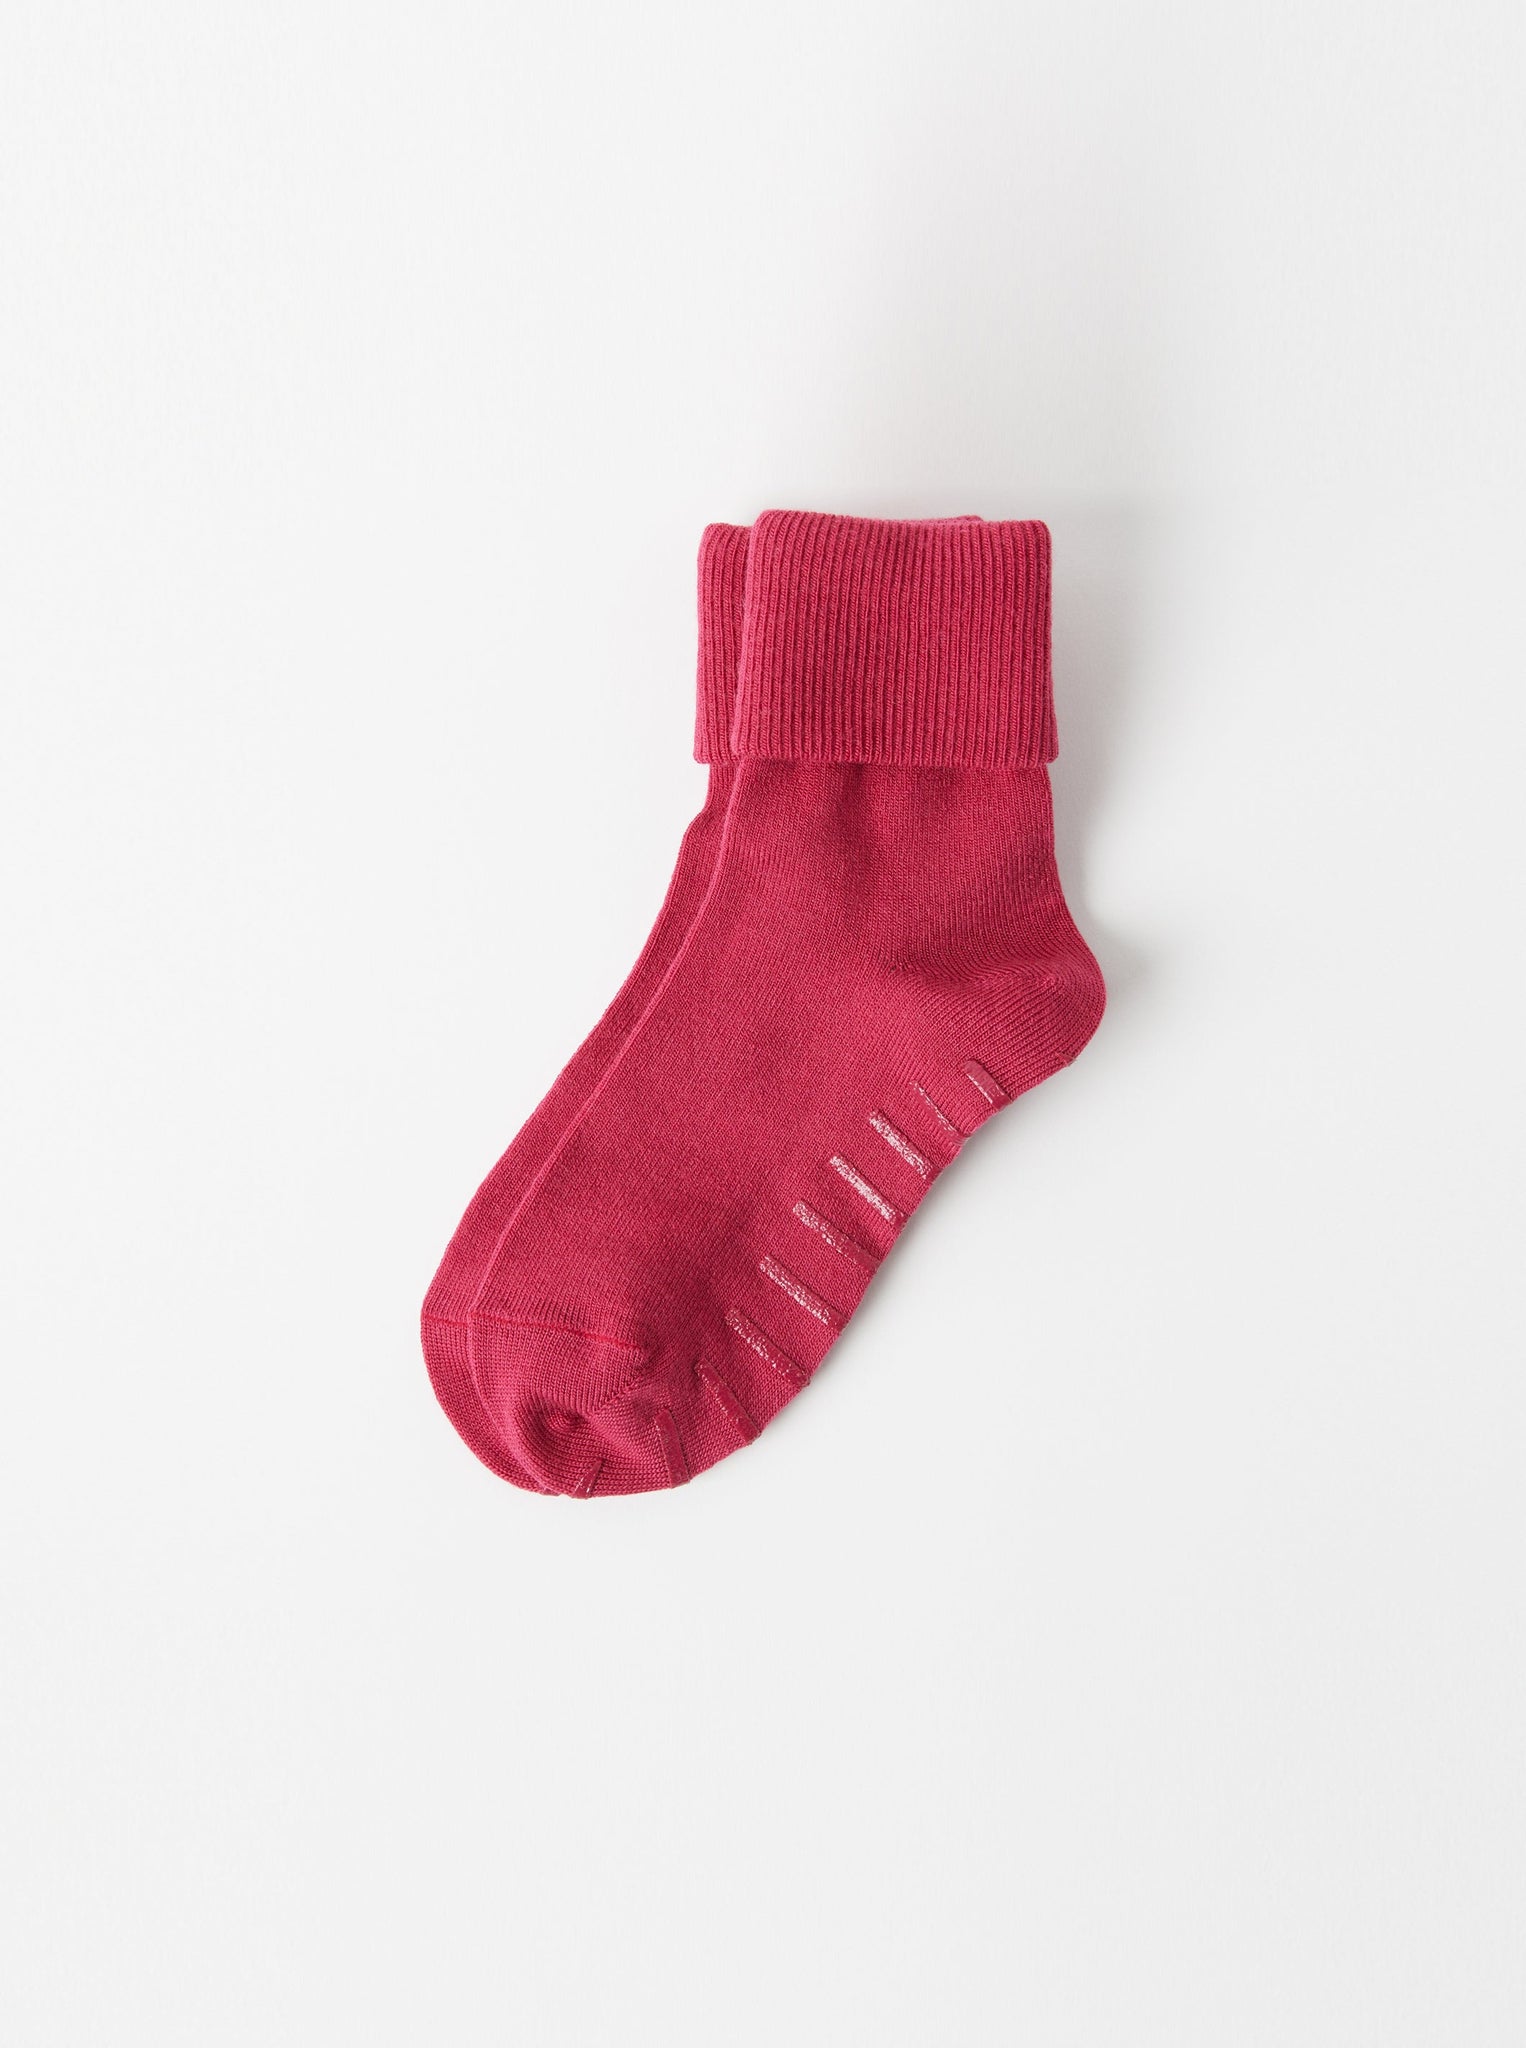 Red Merino Wool Baby Socks from the Polarn O. Pyret kidswear collection. Ethically produced outerwear.